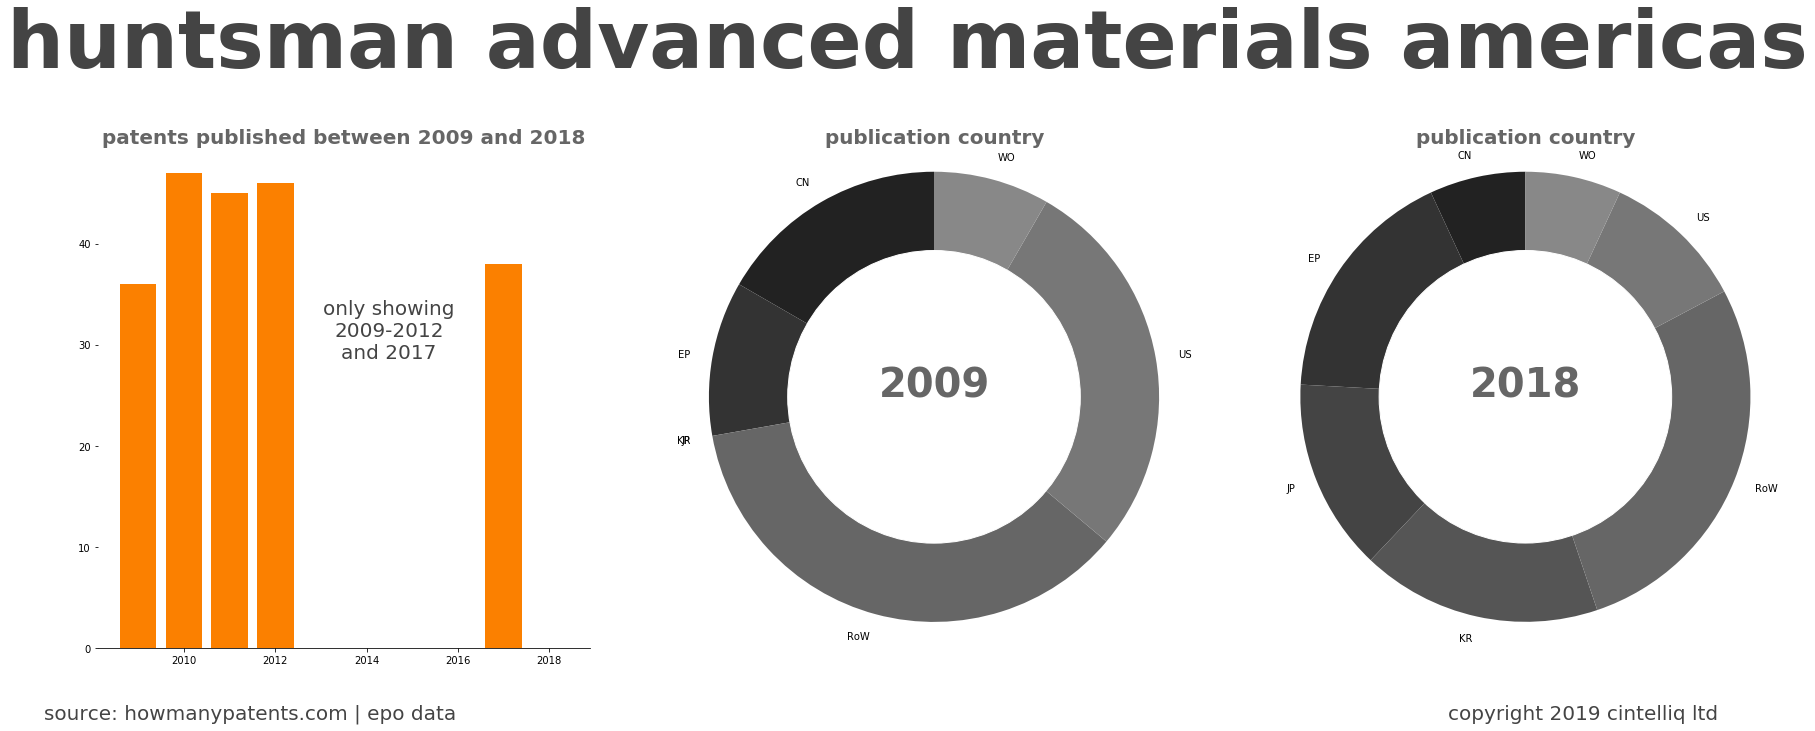 summary of patents for Huntsman Advanced Materials Americas